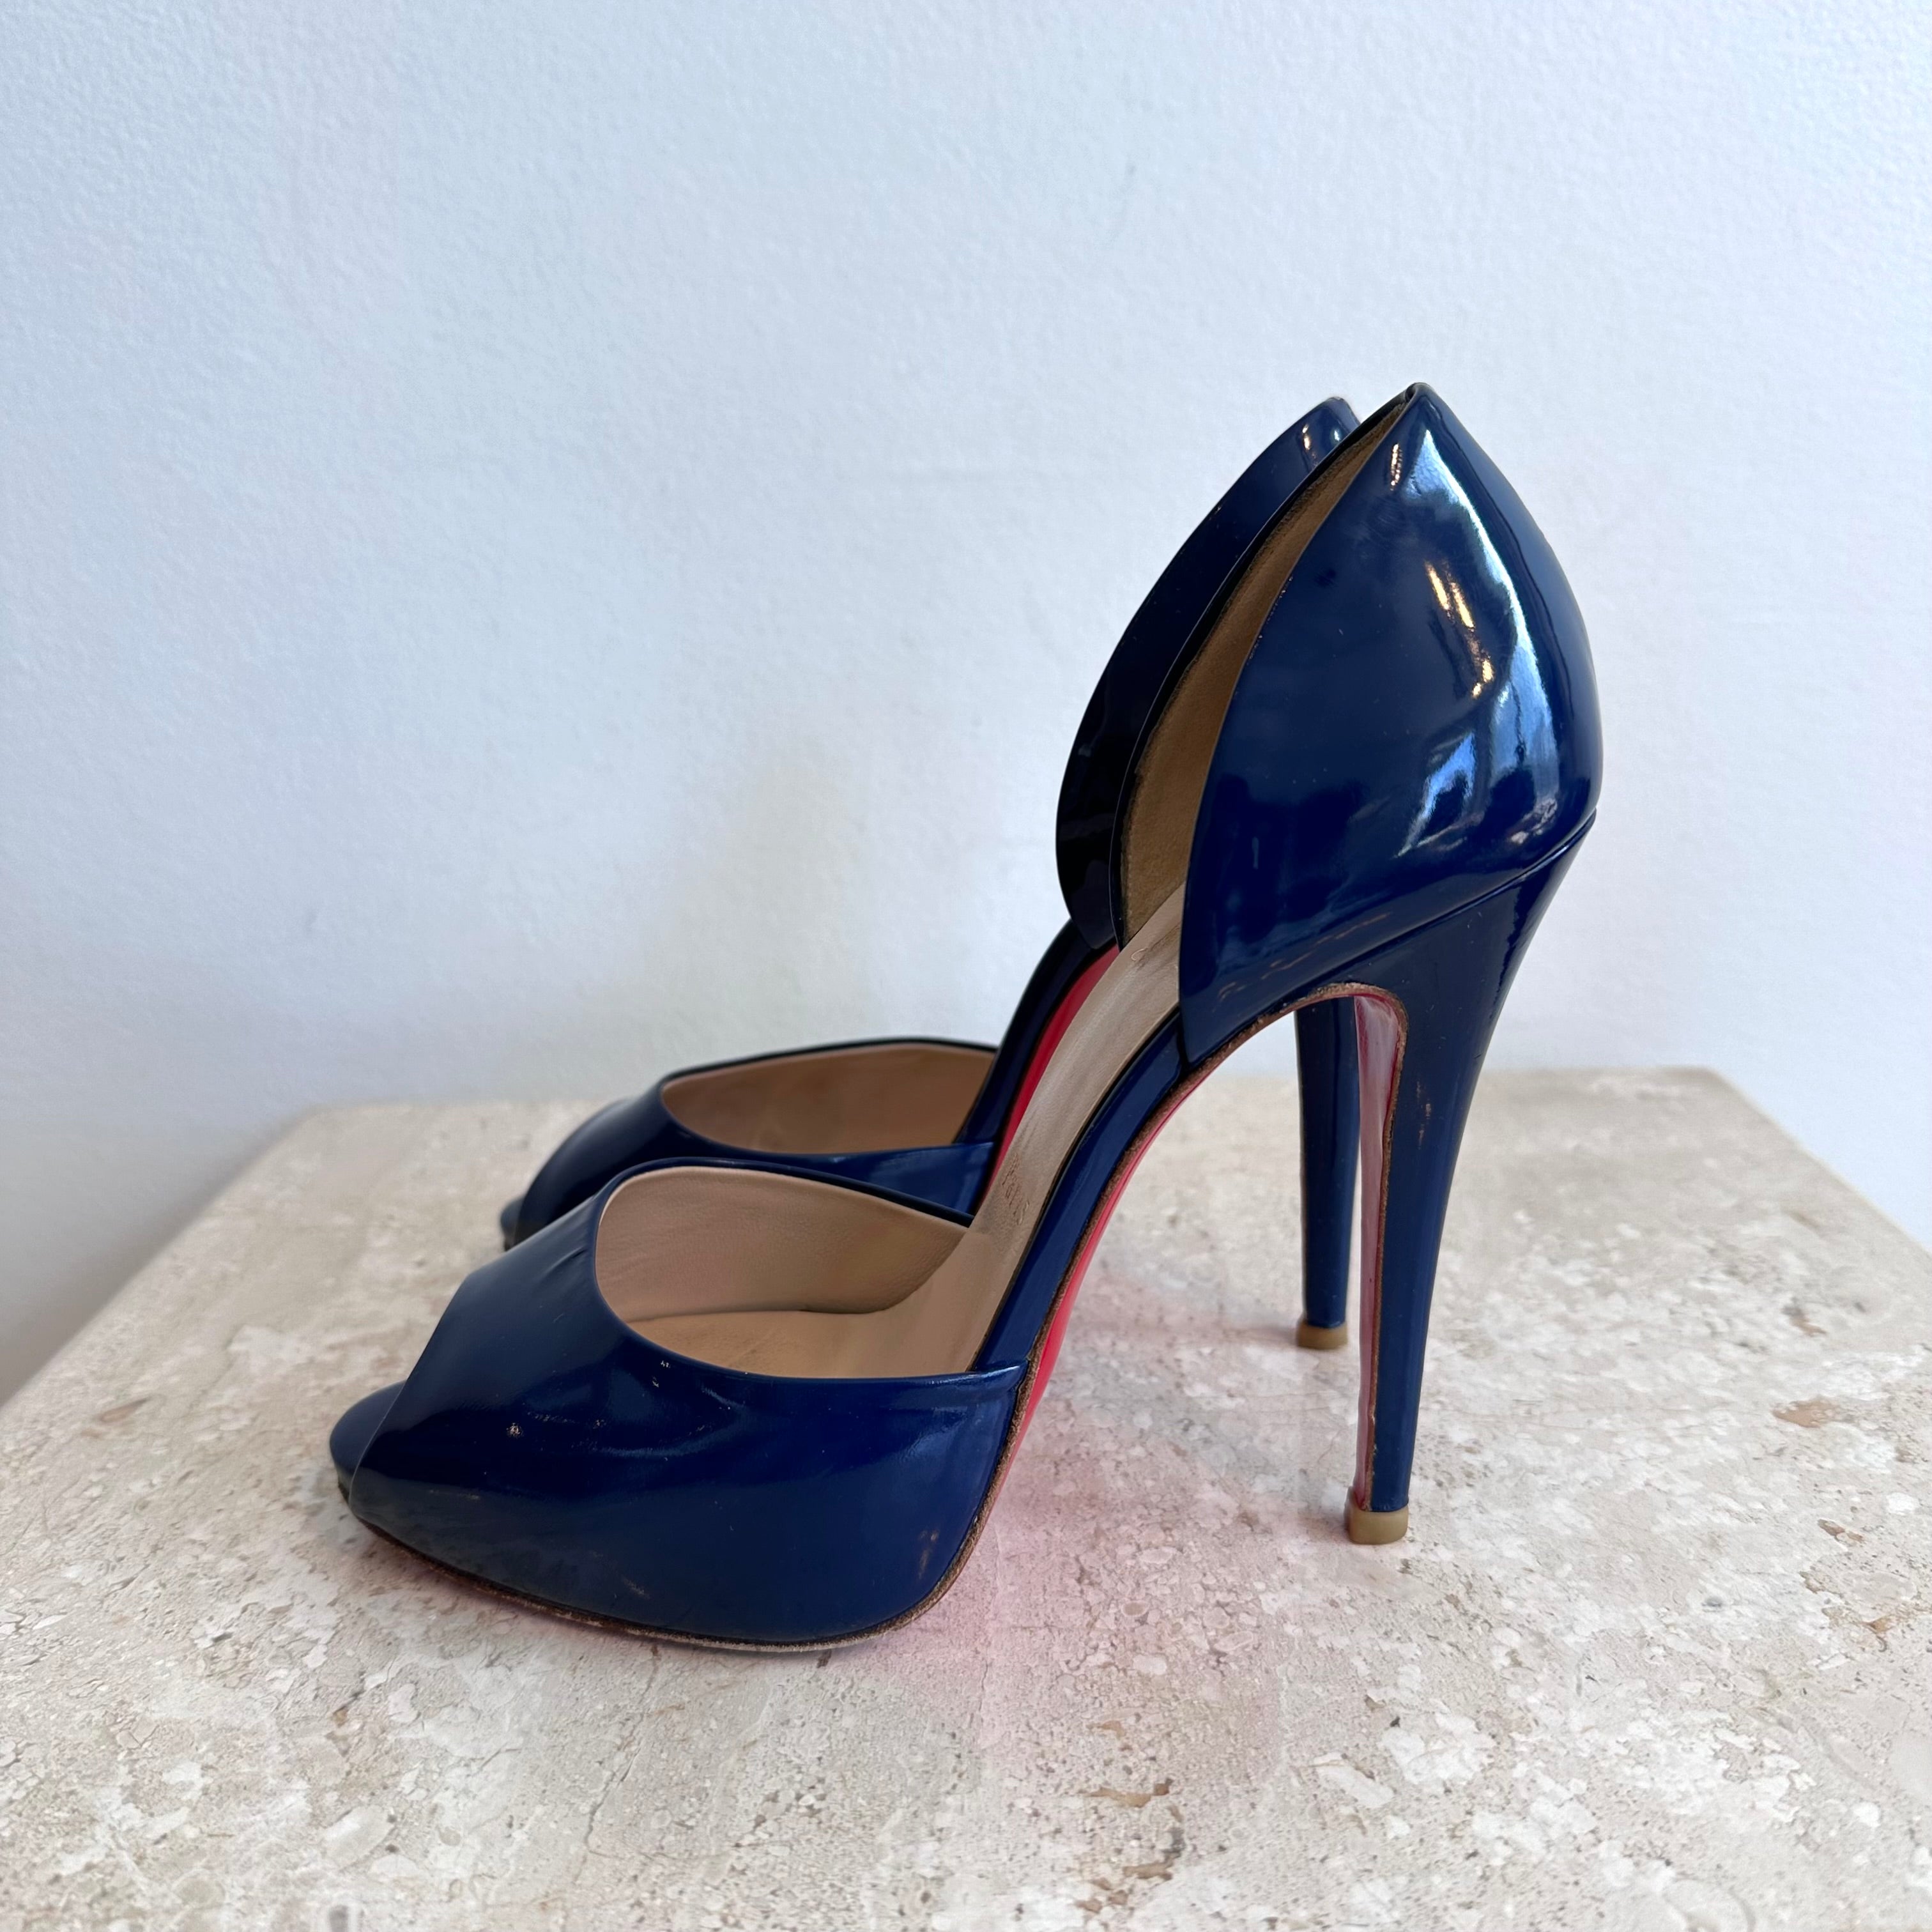 Pre-Owned CHRISTIAN LOUBOUTIN Patent Madame Claude 120 Peep Toe Pumps Size 37